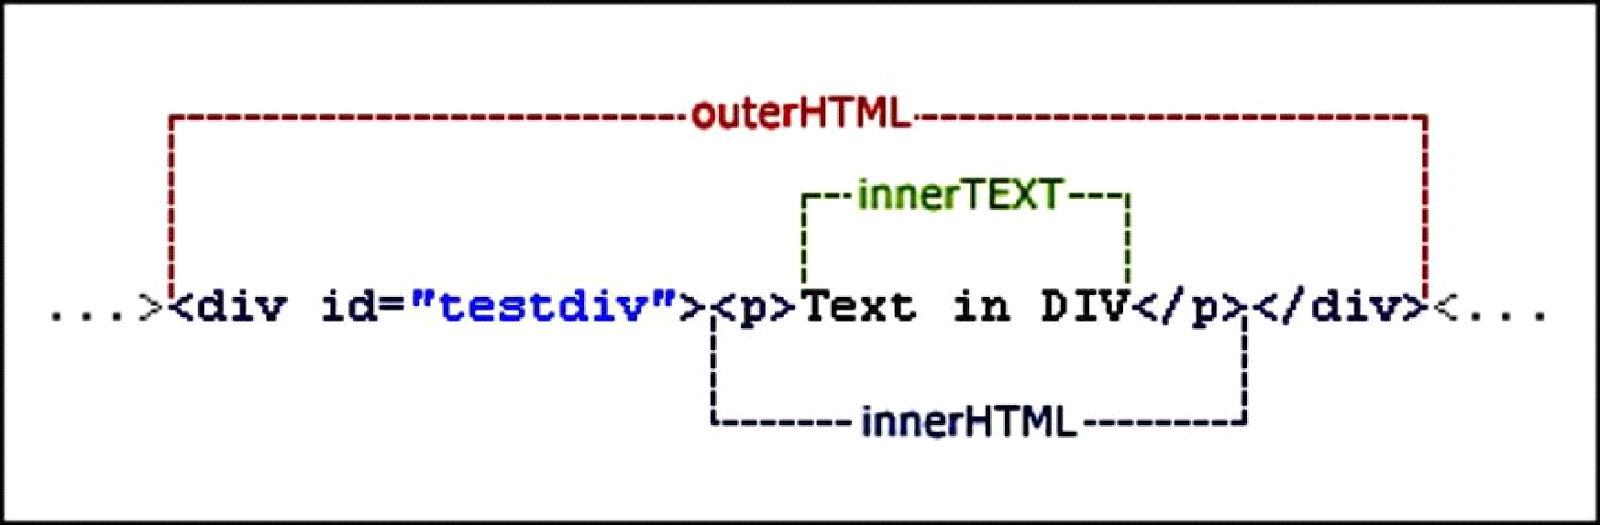 Difference Between innerHTML and outerHTML